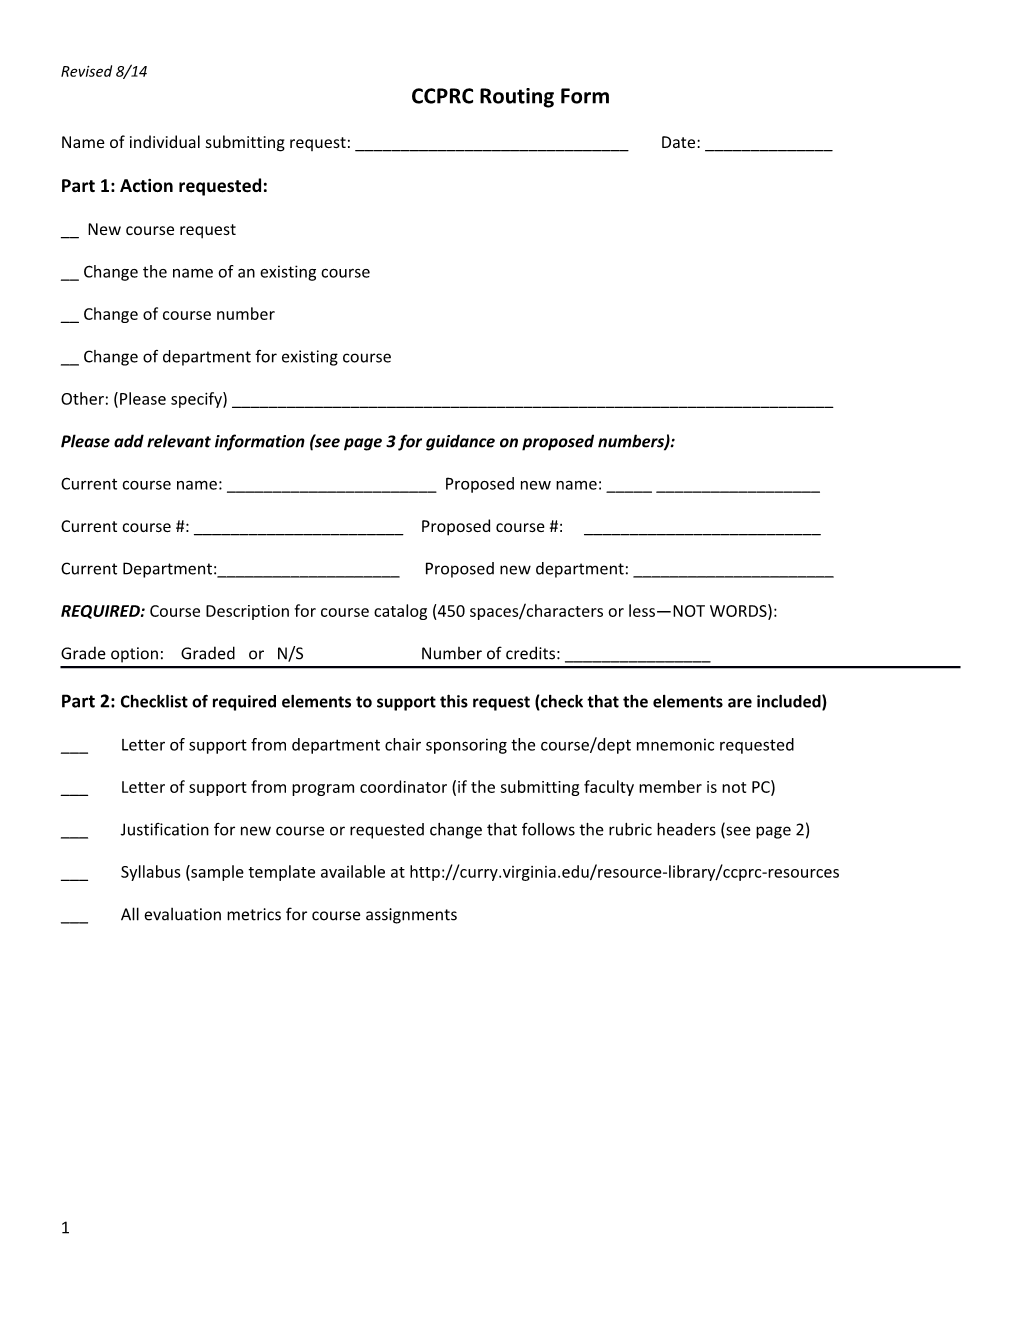 CCPRC Routing Form